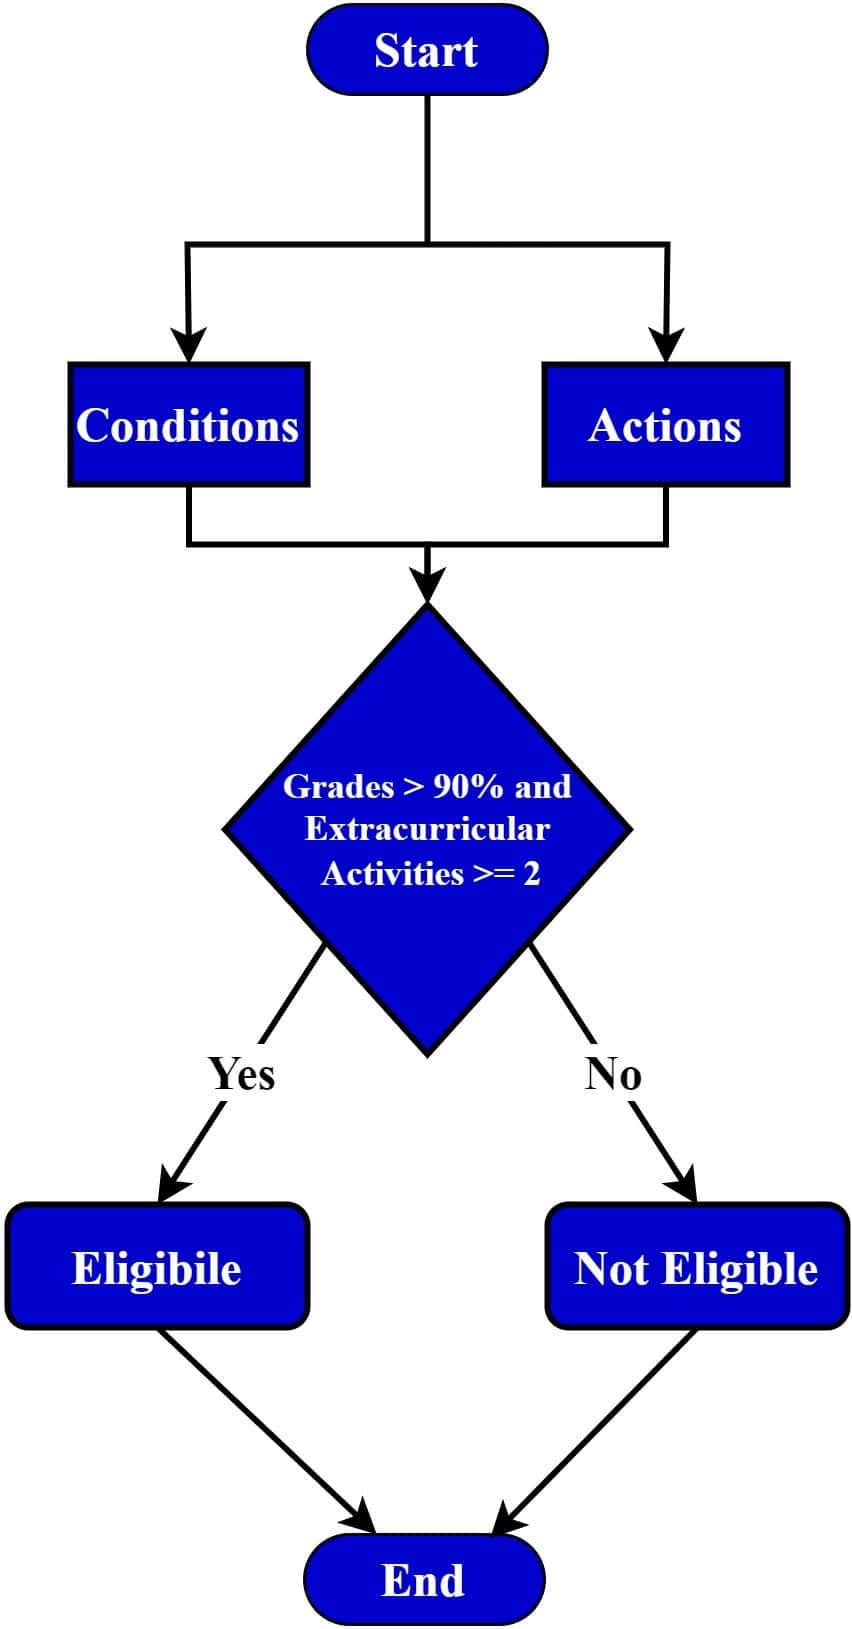 Decision Table Example